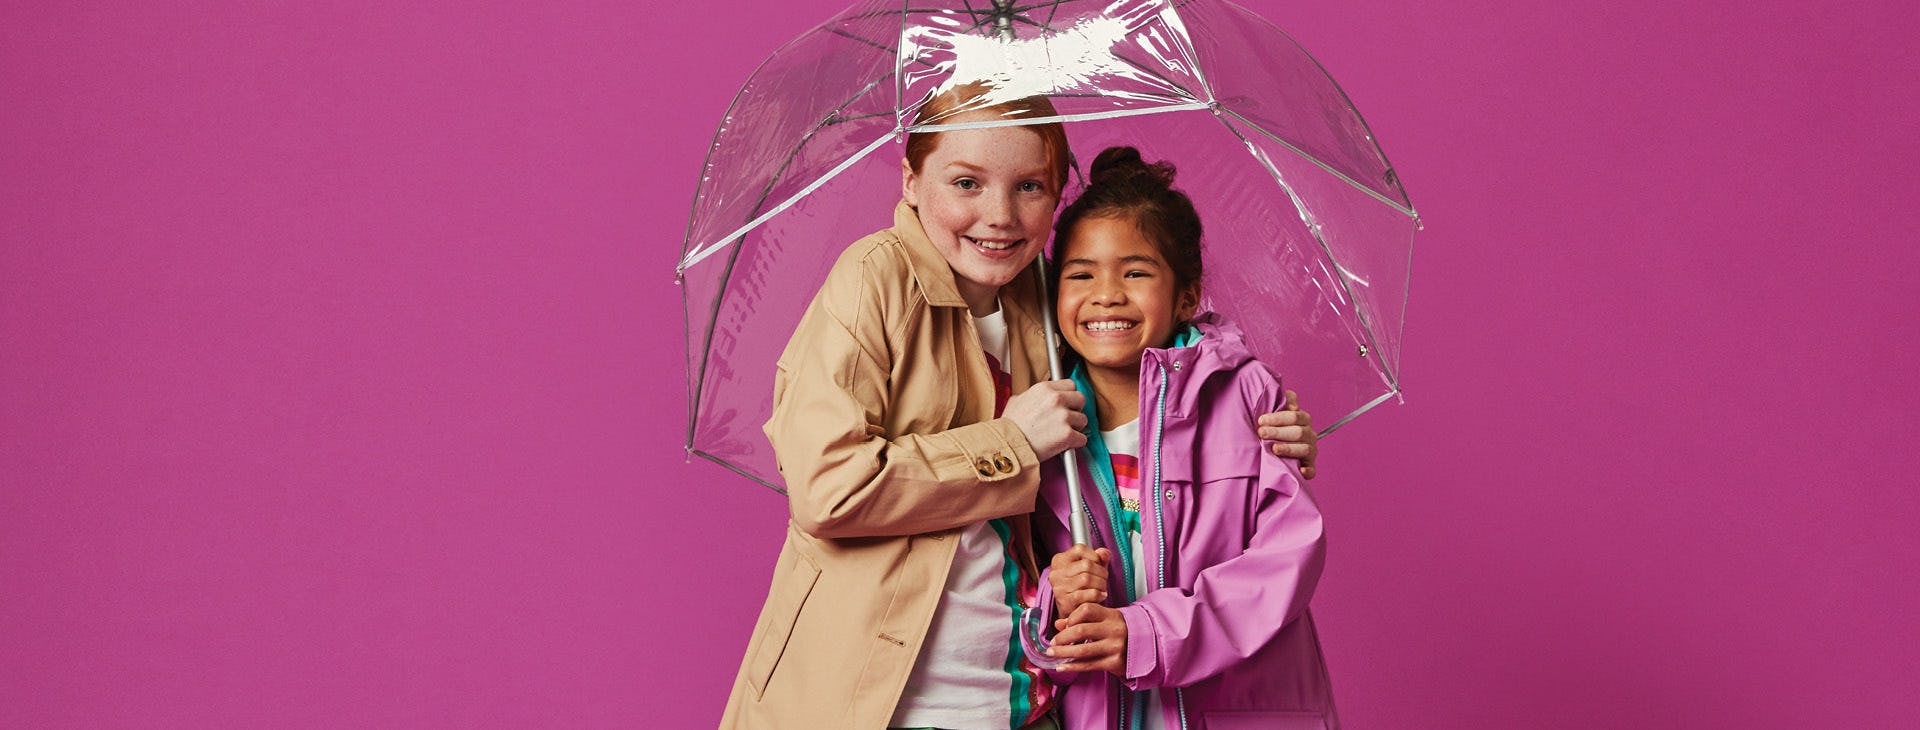 two girls with umbrella 